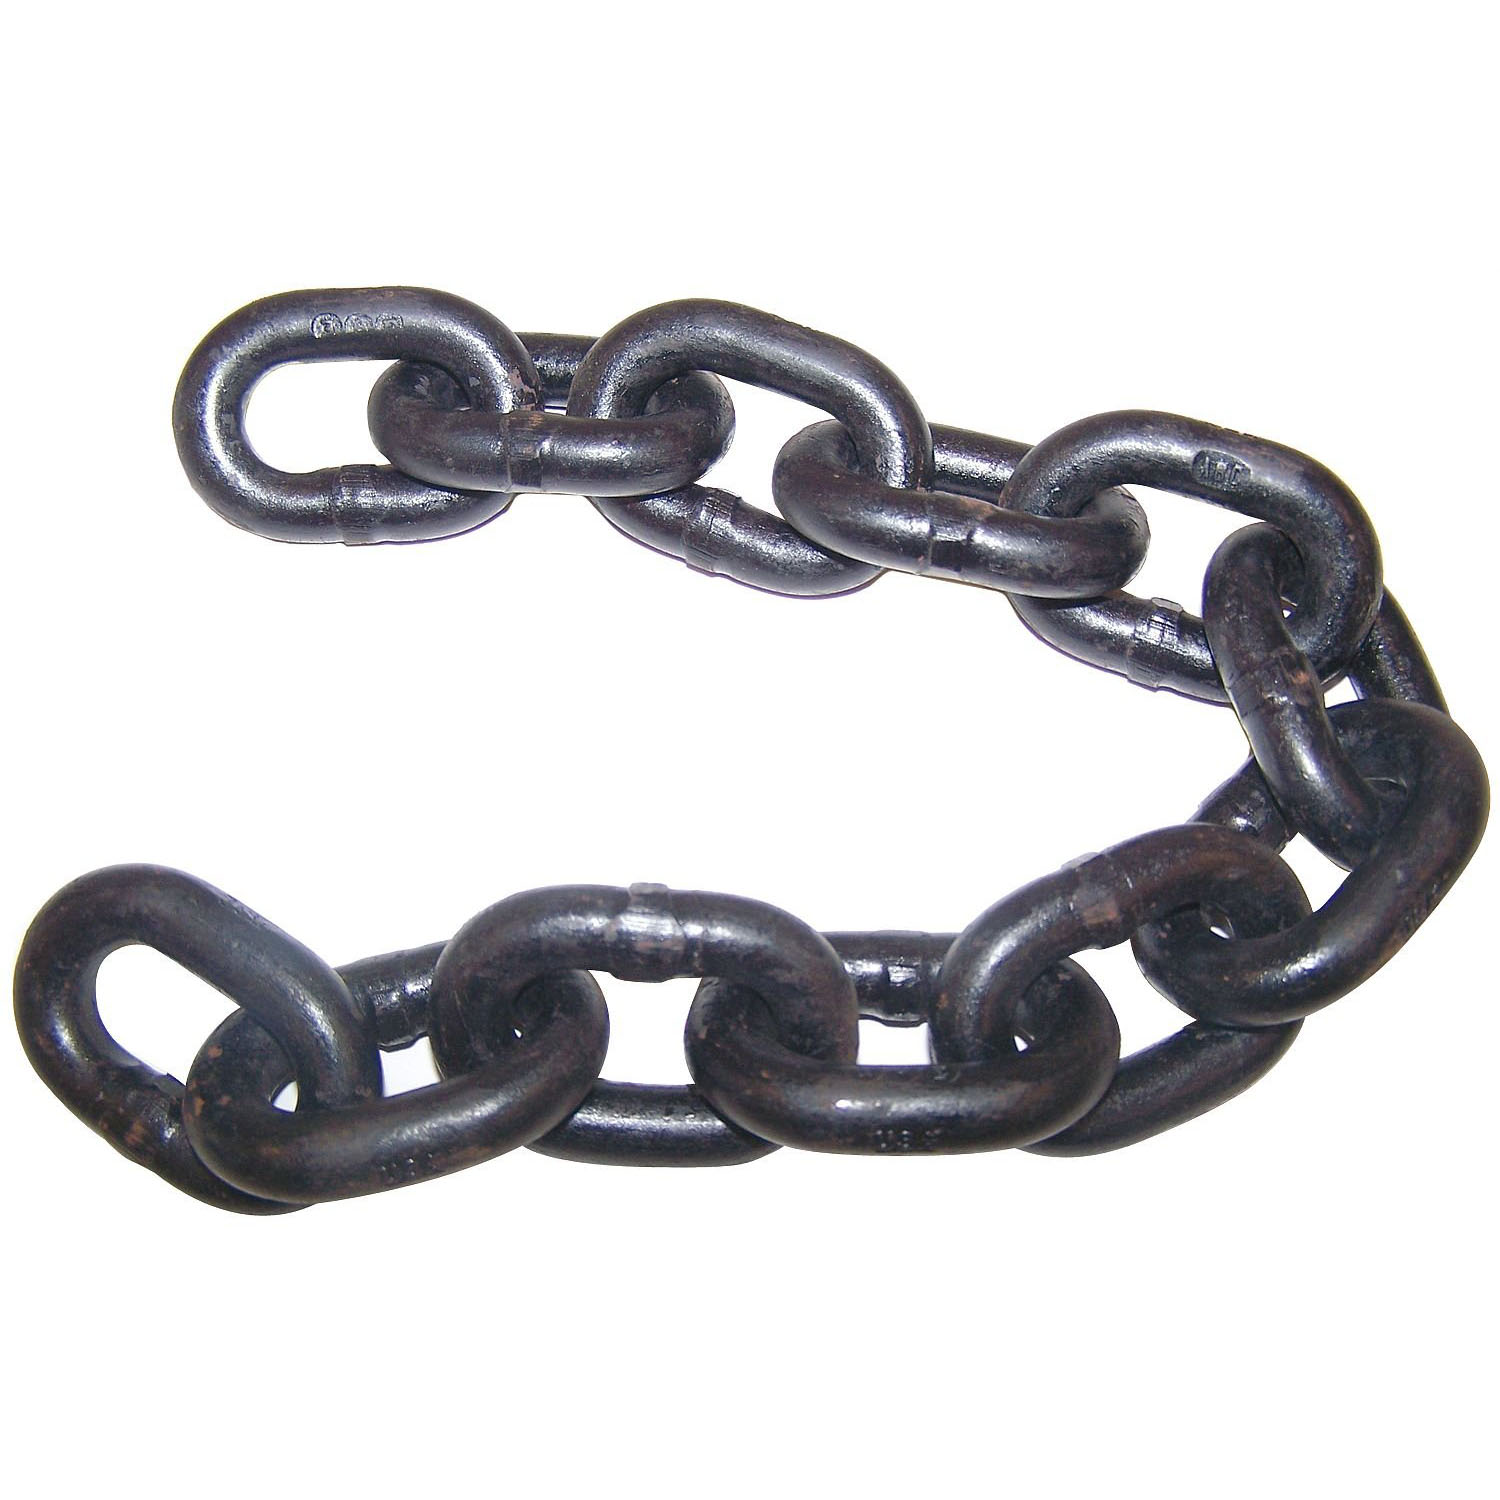 /userfiles/images/categories/mat/eri/al_/material_handling.chain_and_chain_accessories.jpg